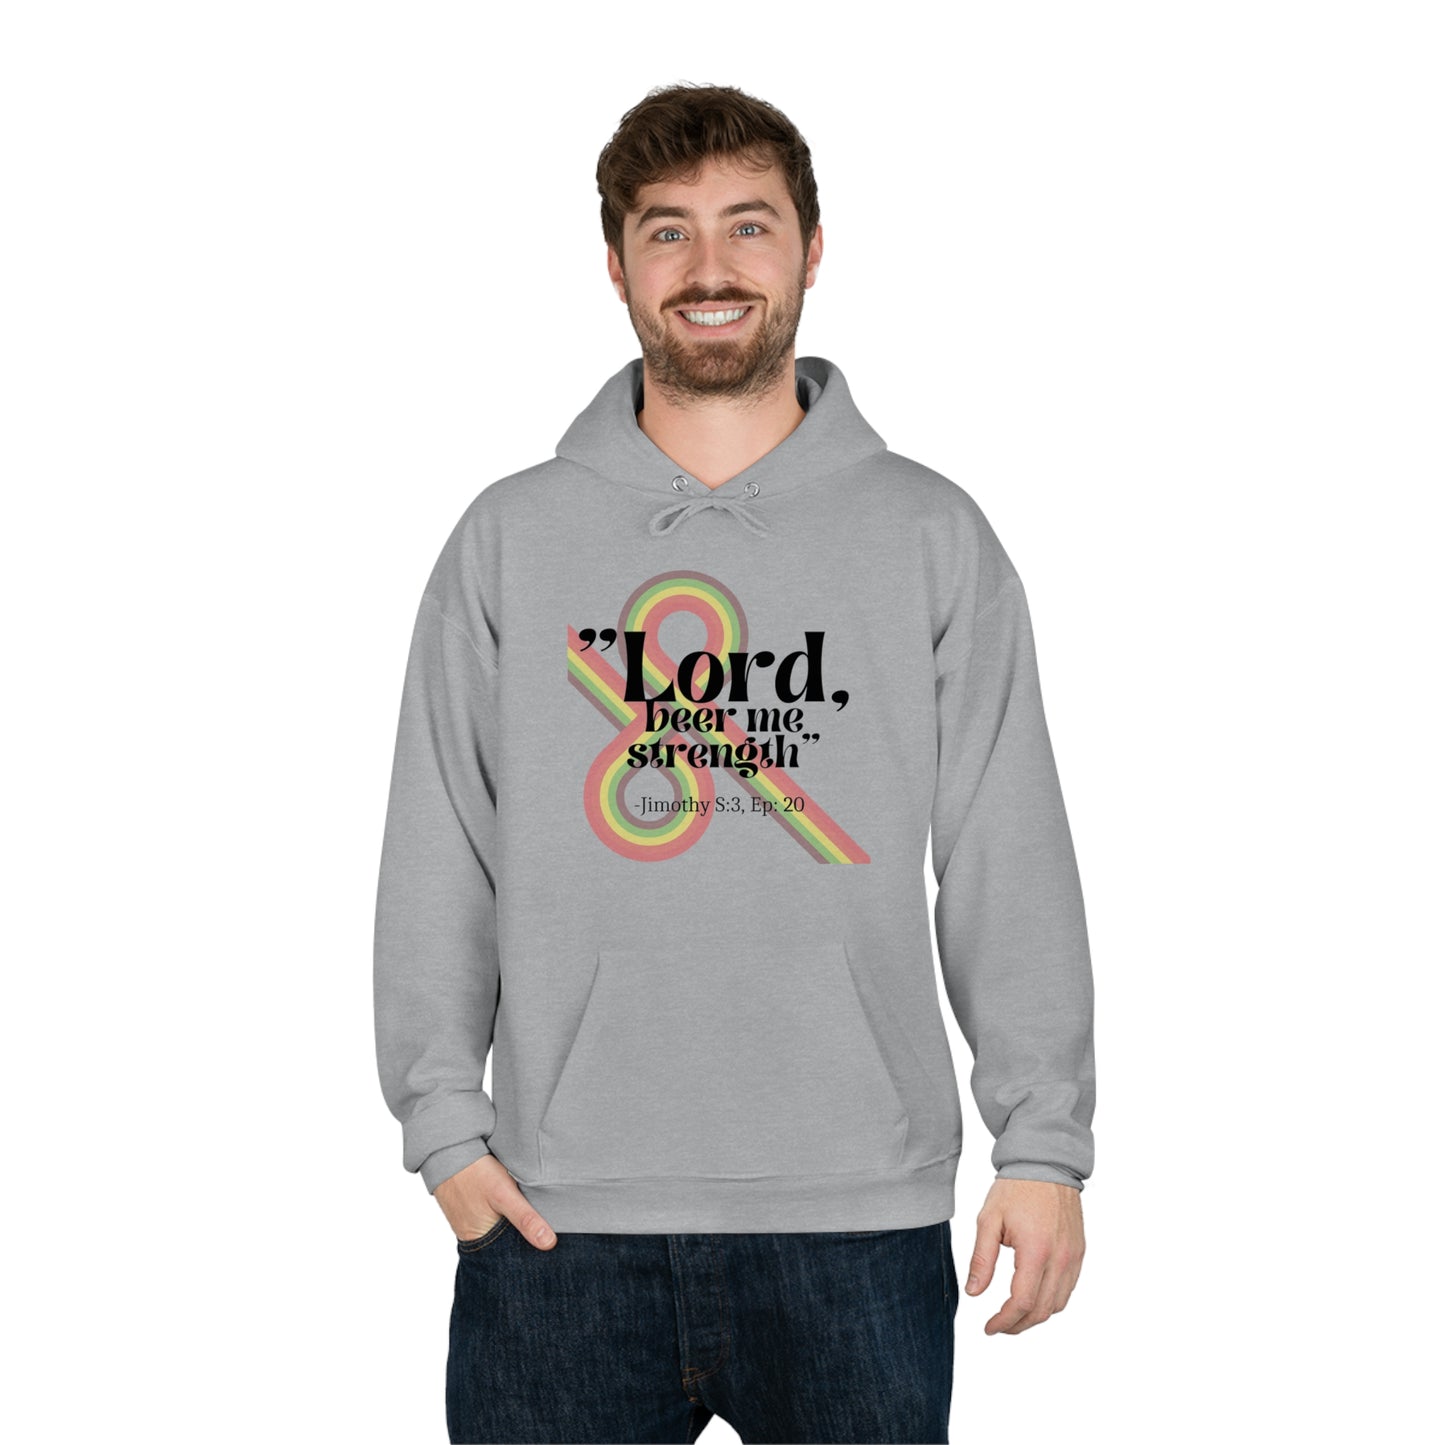 the Office show hoodie - Lord beer me strength quote - Jim Halpert quote hoodie - the Office fan gift